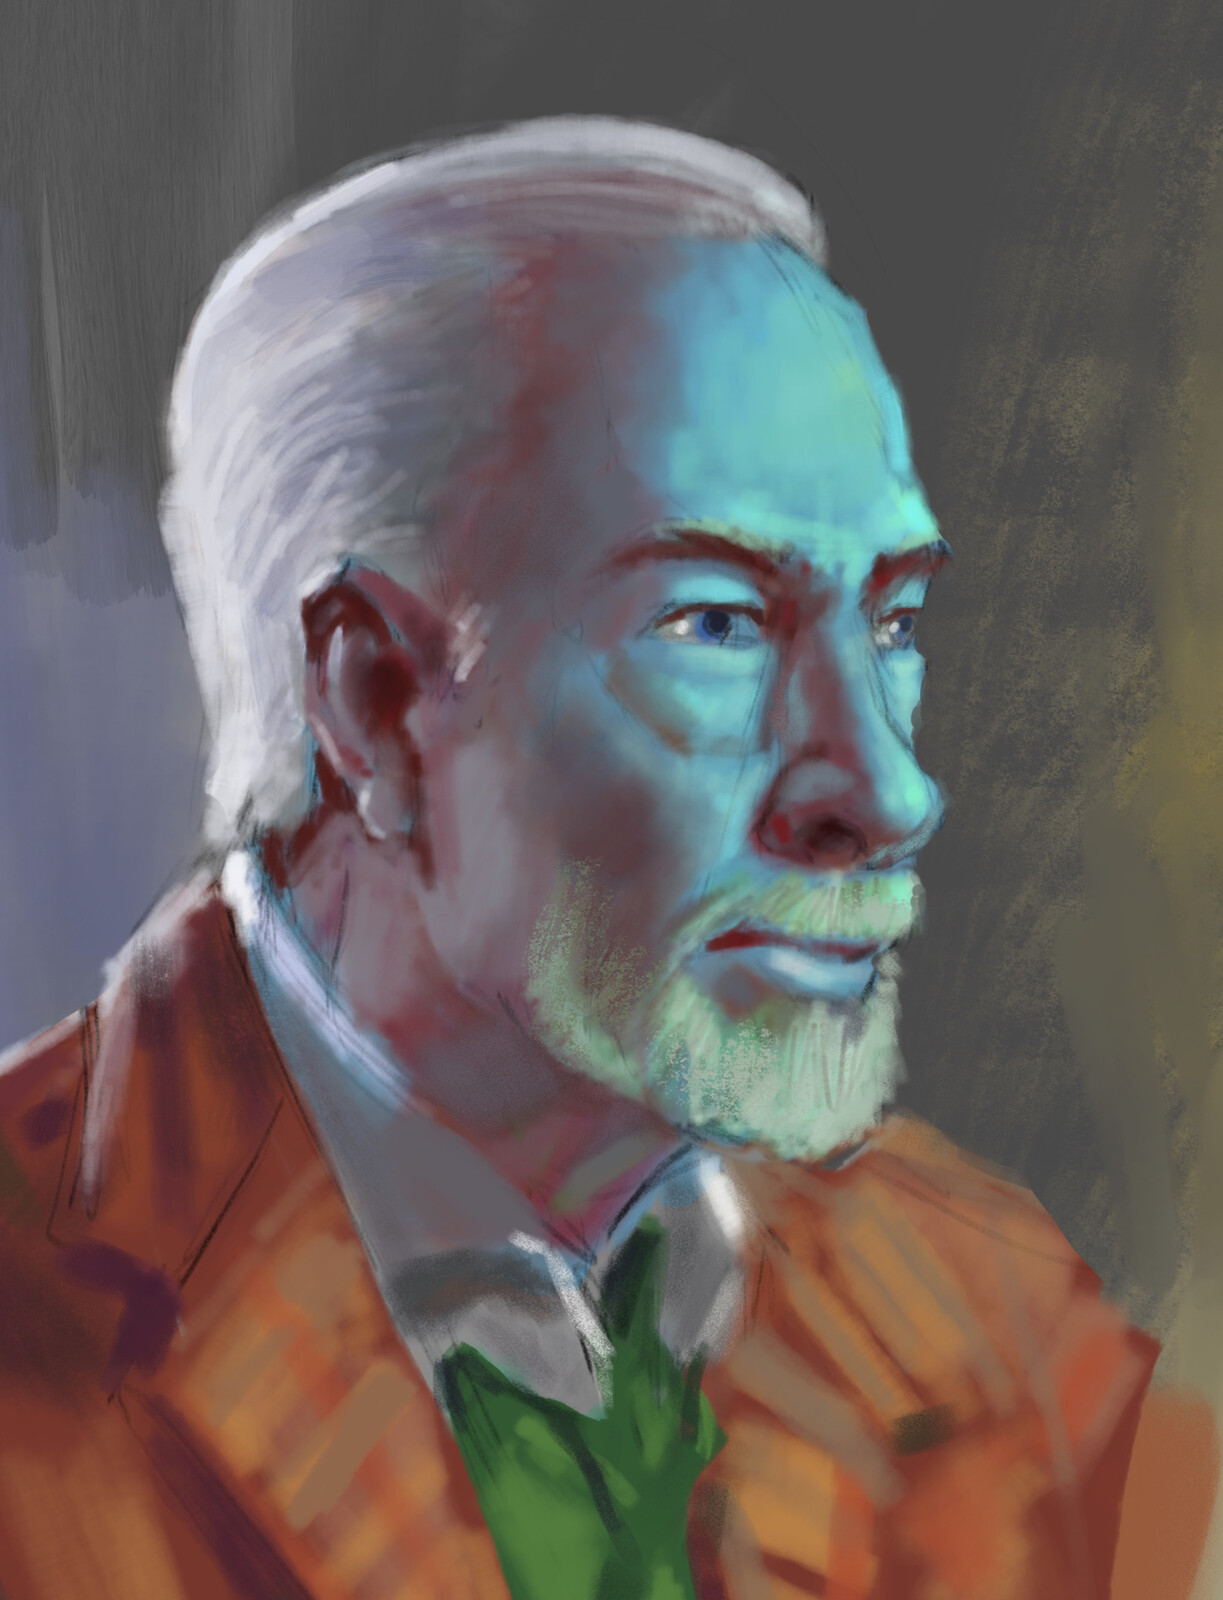 Christopher Plummer from "Knives out"